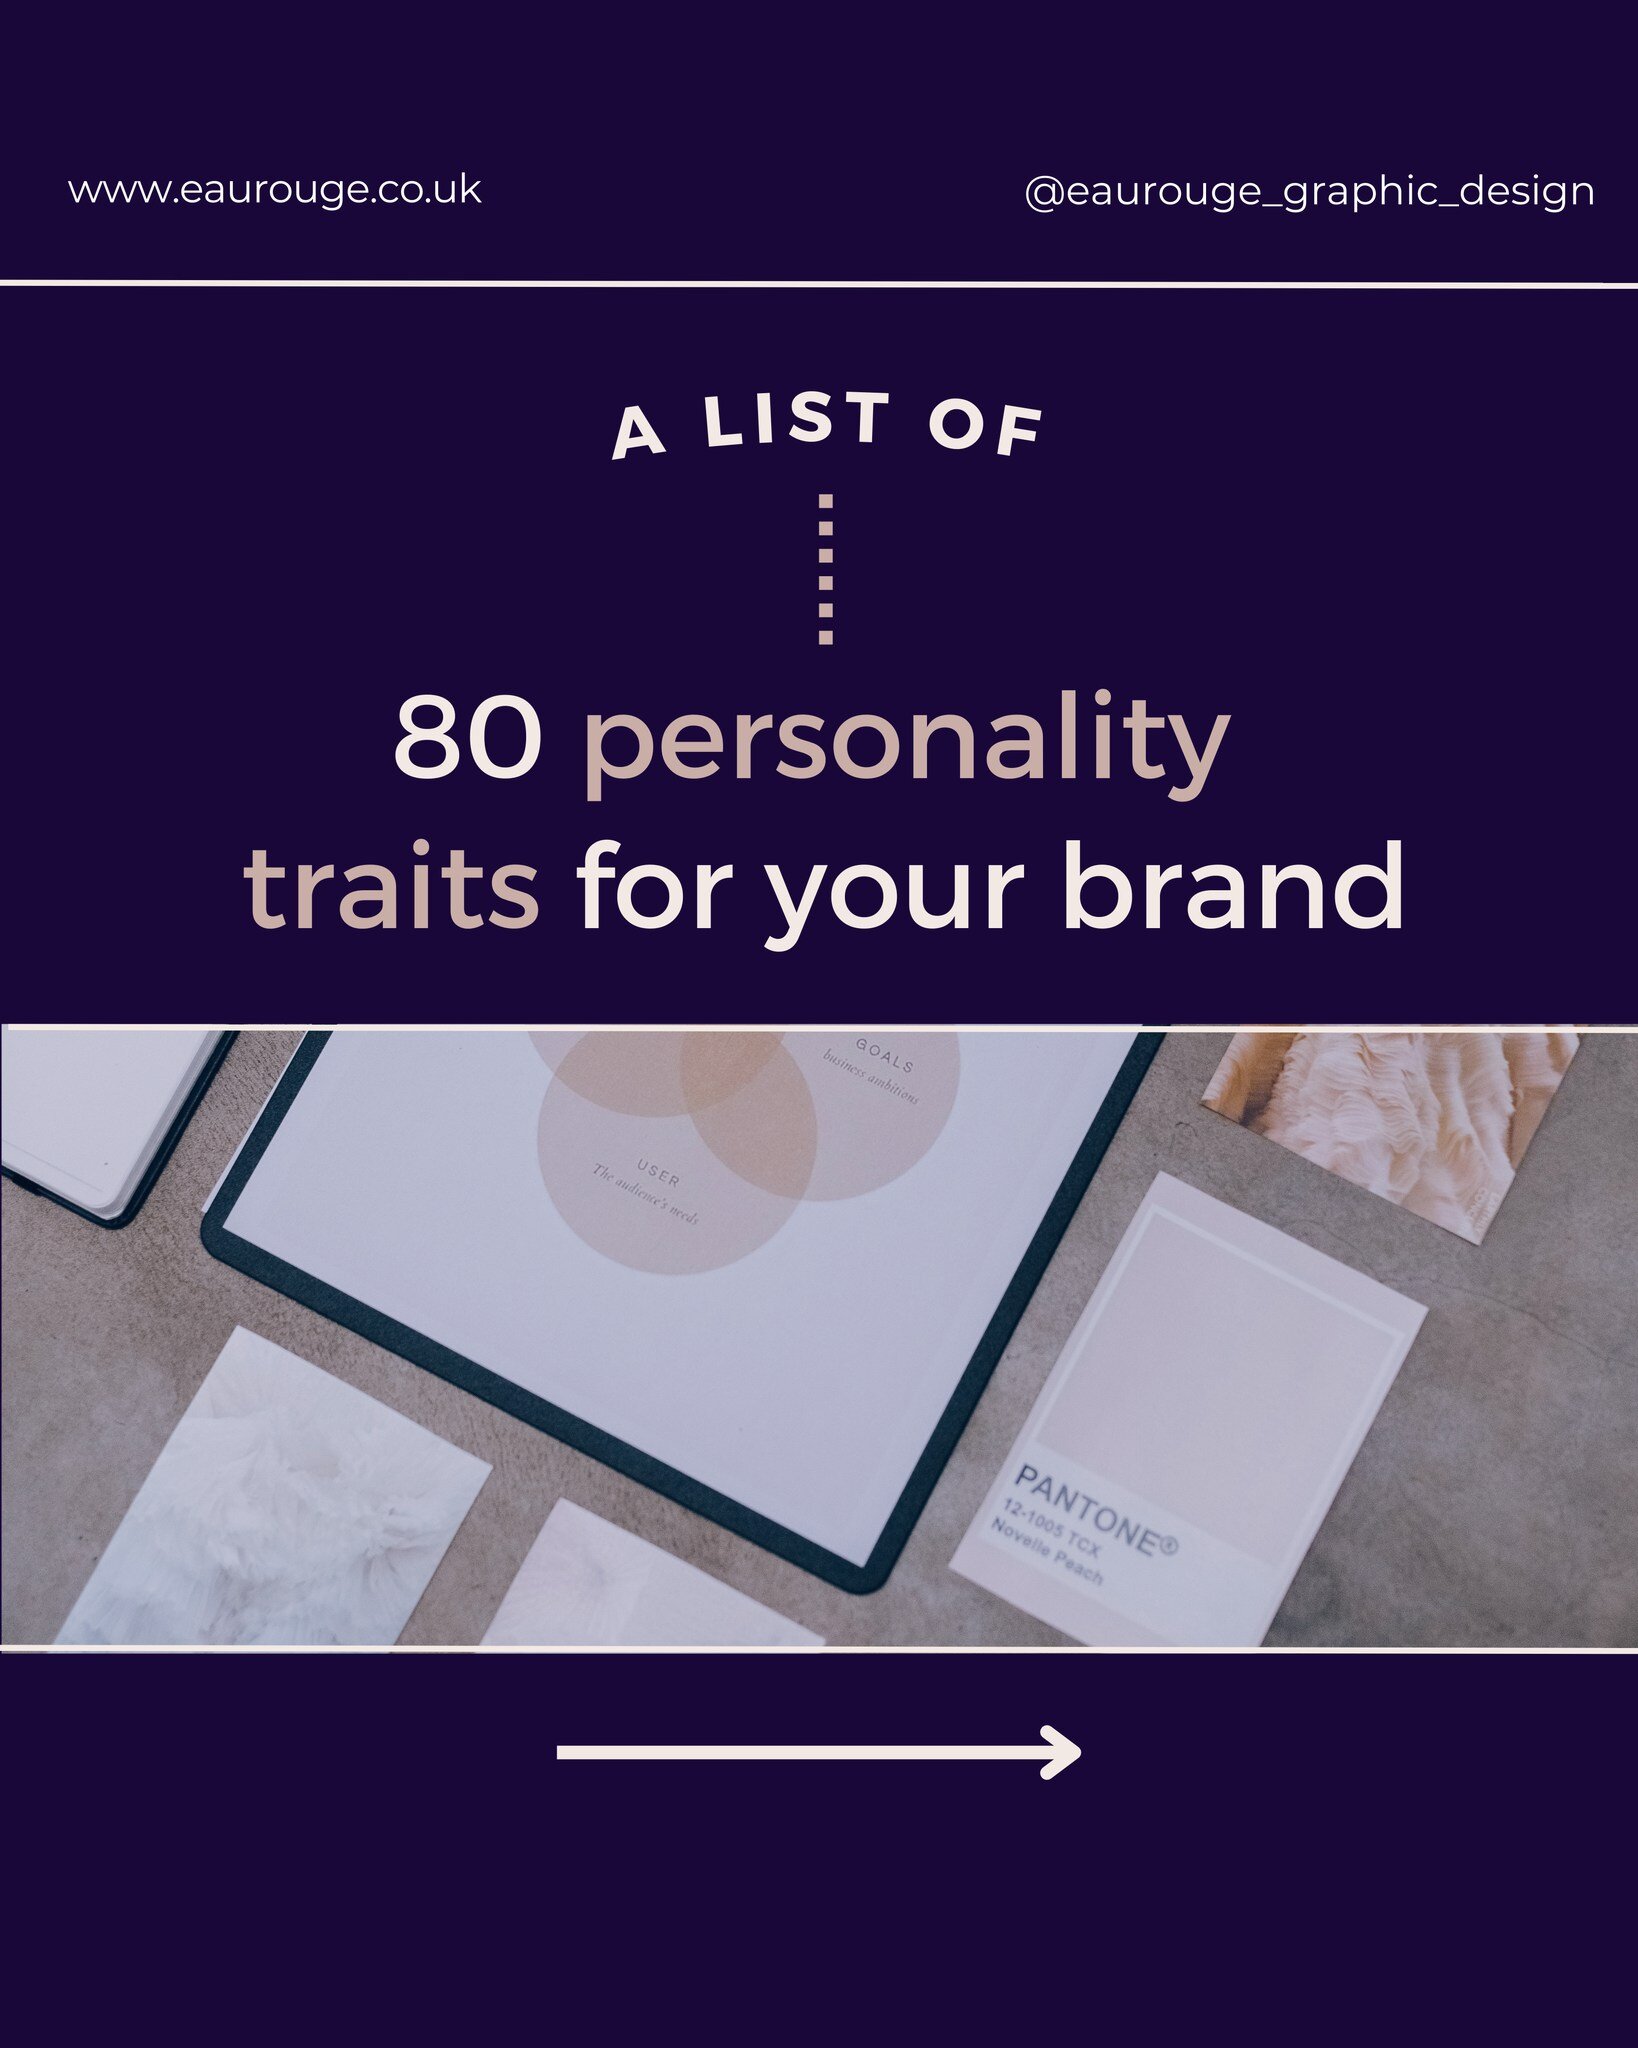 Personalities aren't JUST for humans, they're for brands too! 🙌🏼

Your brand isn't just a colour palette and a few fonts; it goes deeper into the depths of having a character - one that connects and resonates with your ideal clients. ✨

It's like w